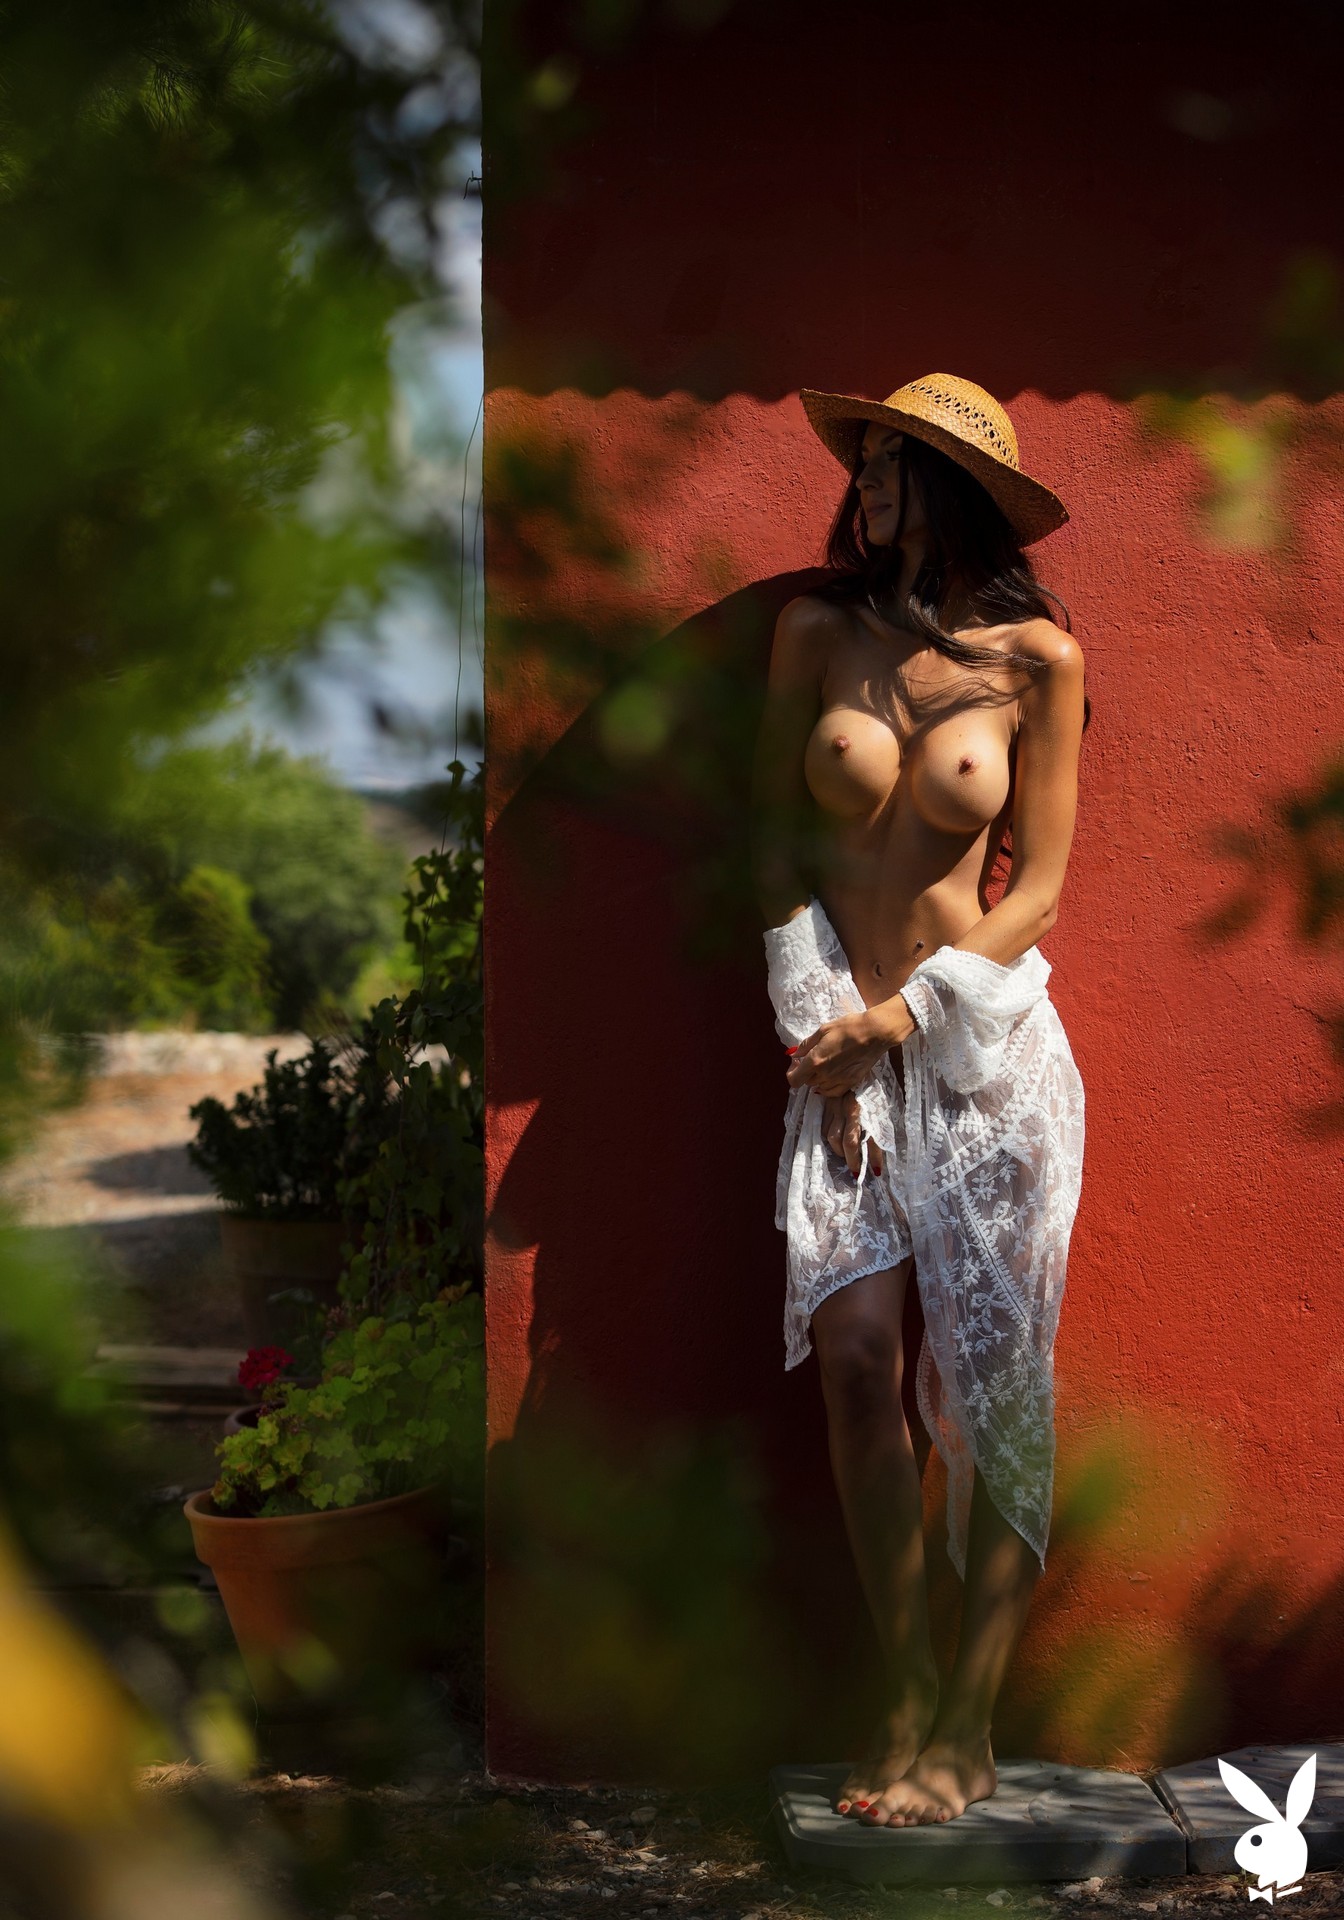 Explore Andalusia’s striking countryside with Spanish model Zurine Aspiunza. 